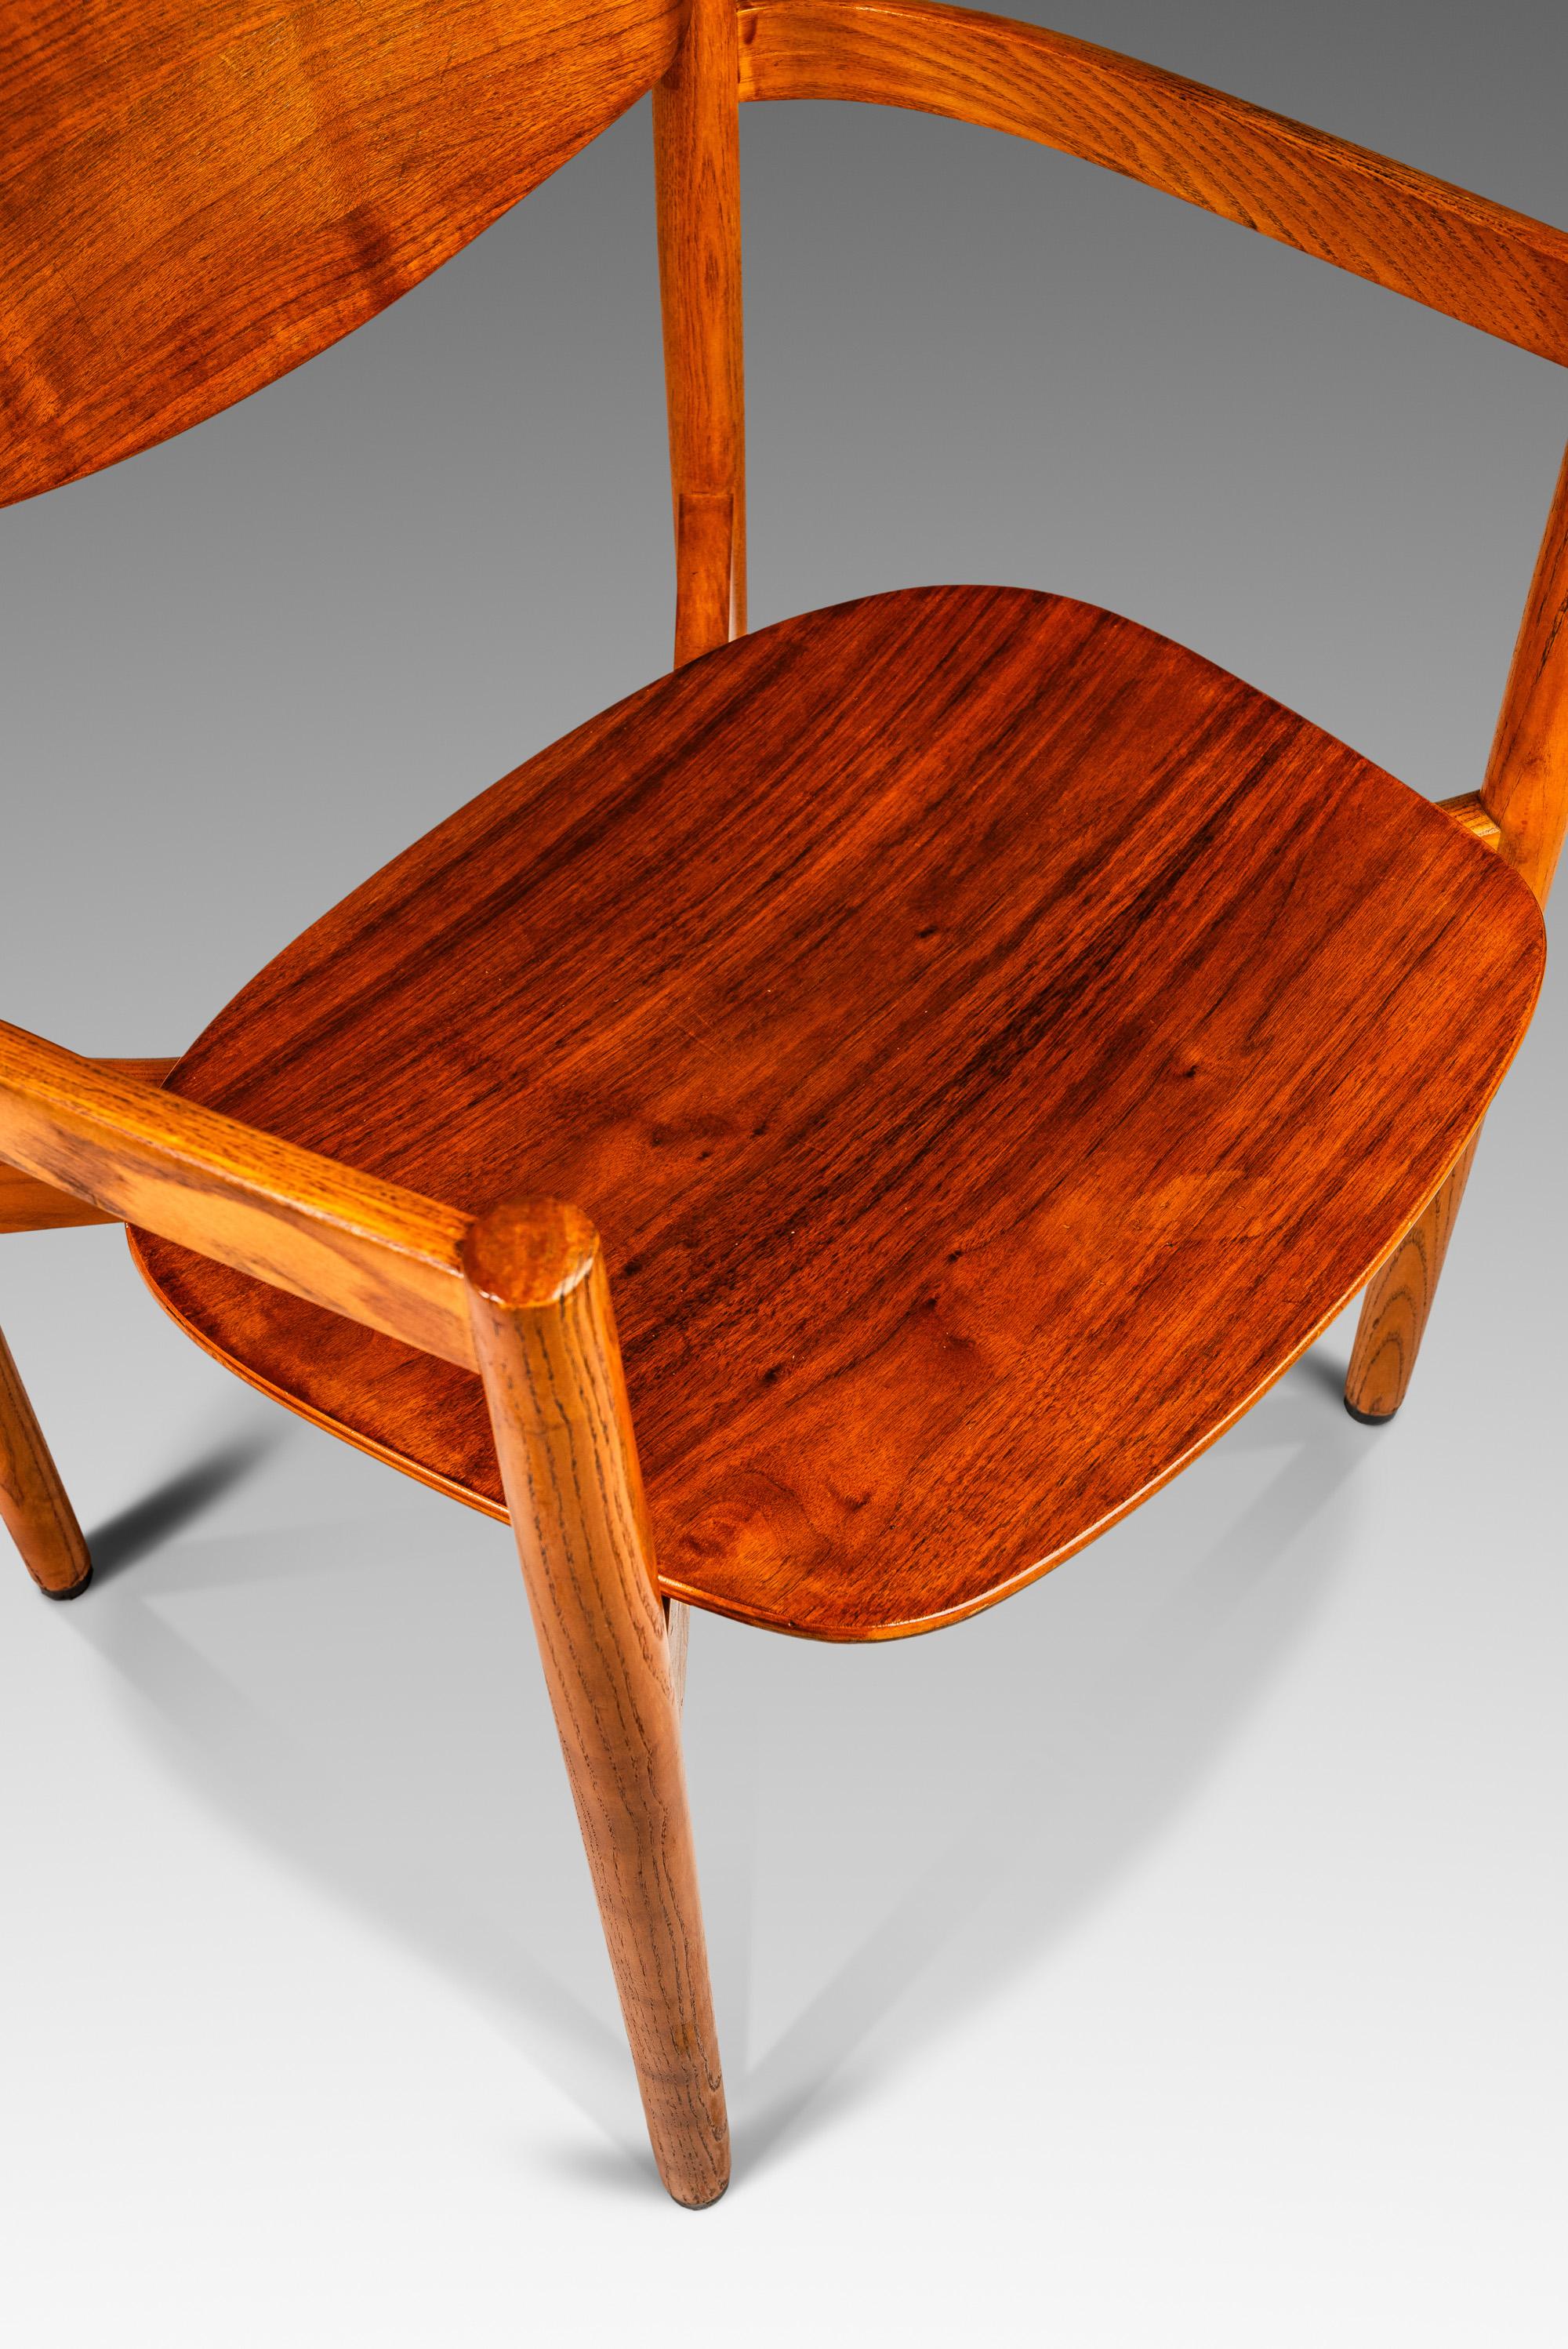 Set of 6 Stacking in Oak & Walnut Chairs by Jens Risom, USA, c. 1960s For Sale 6